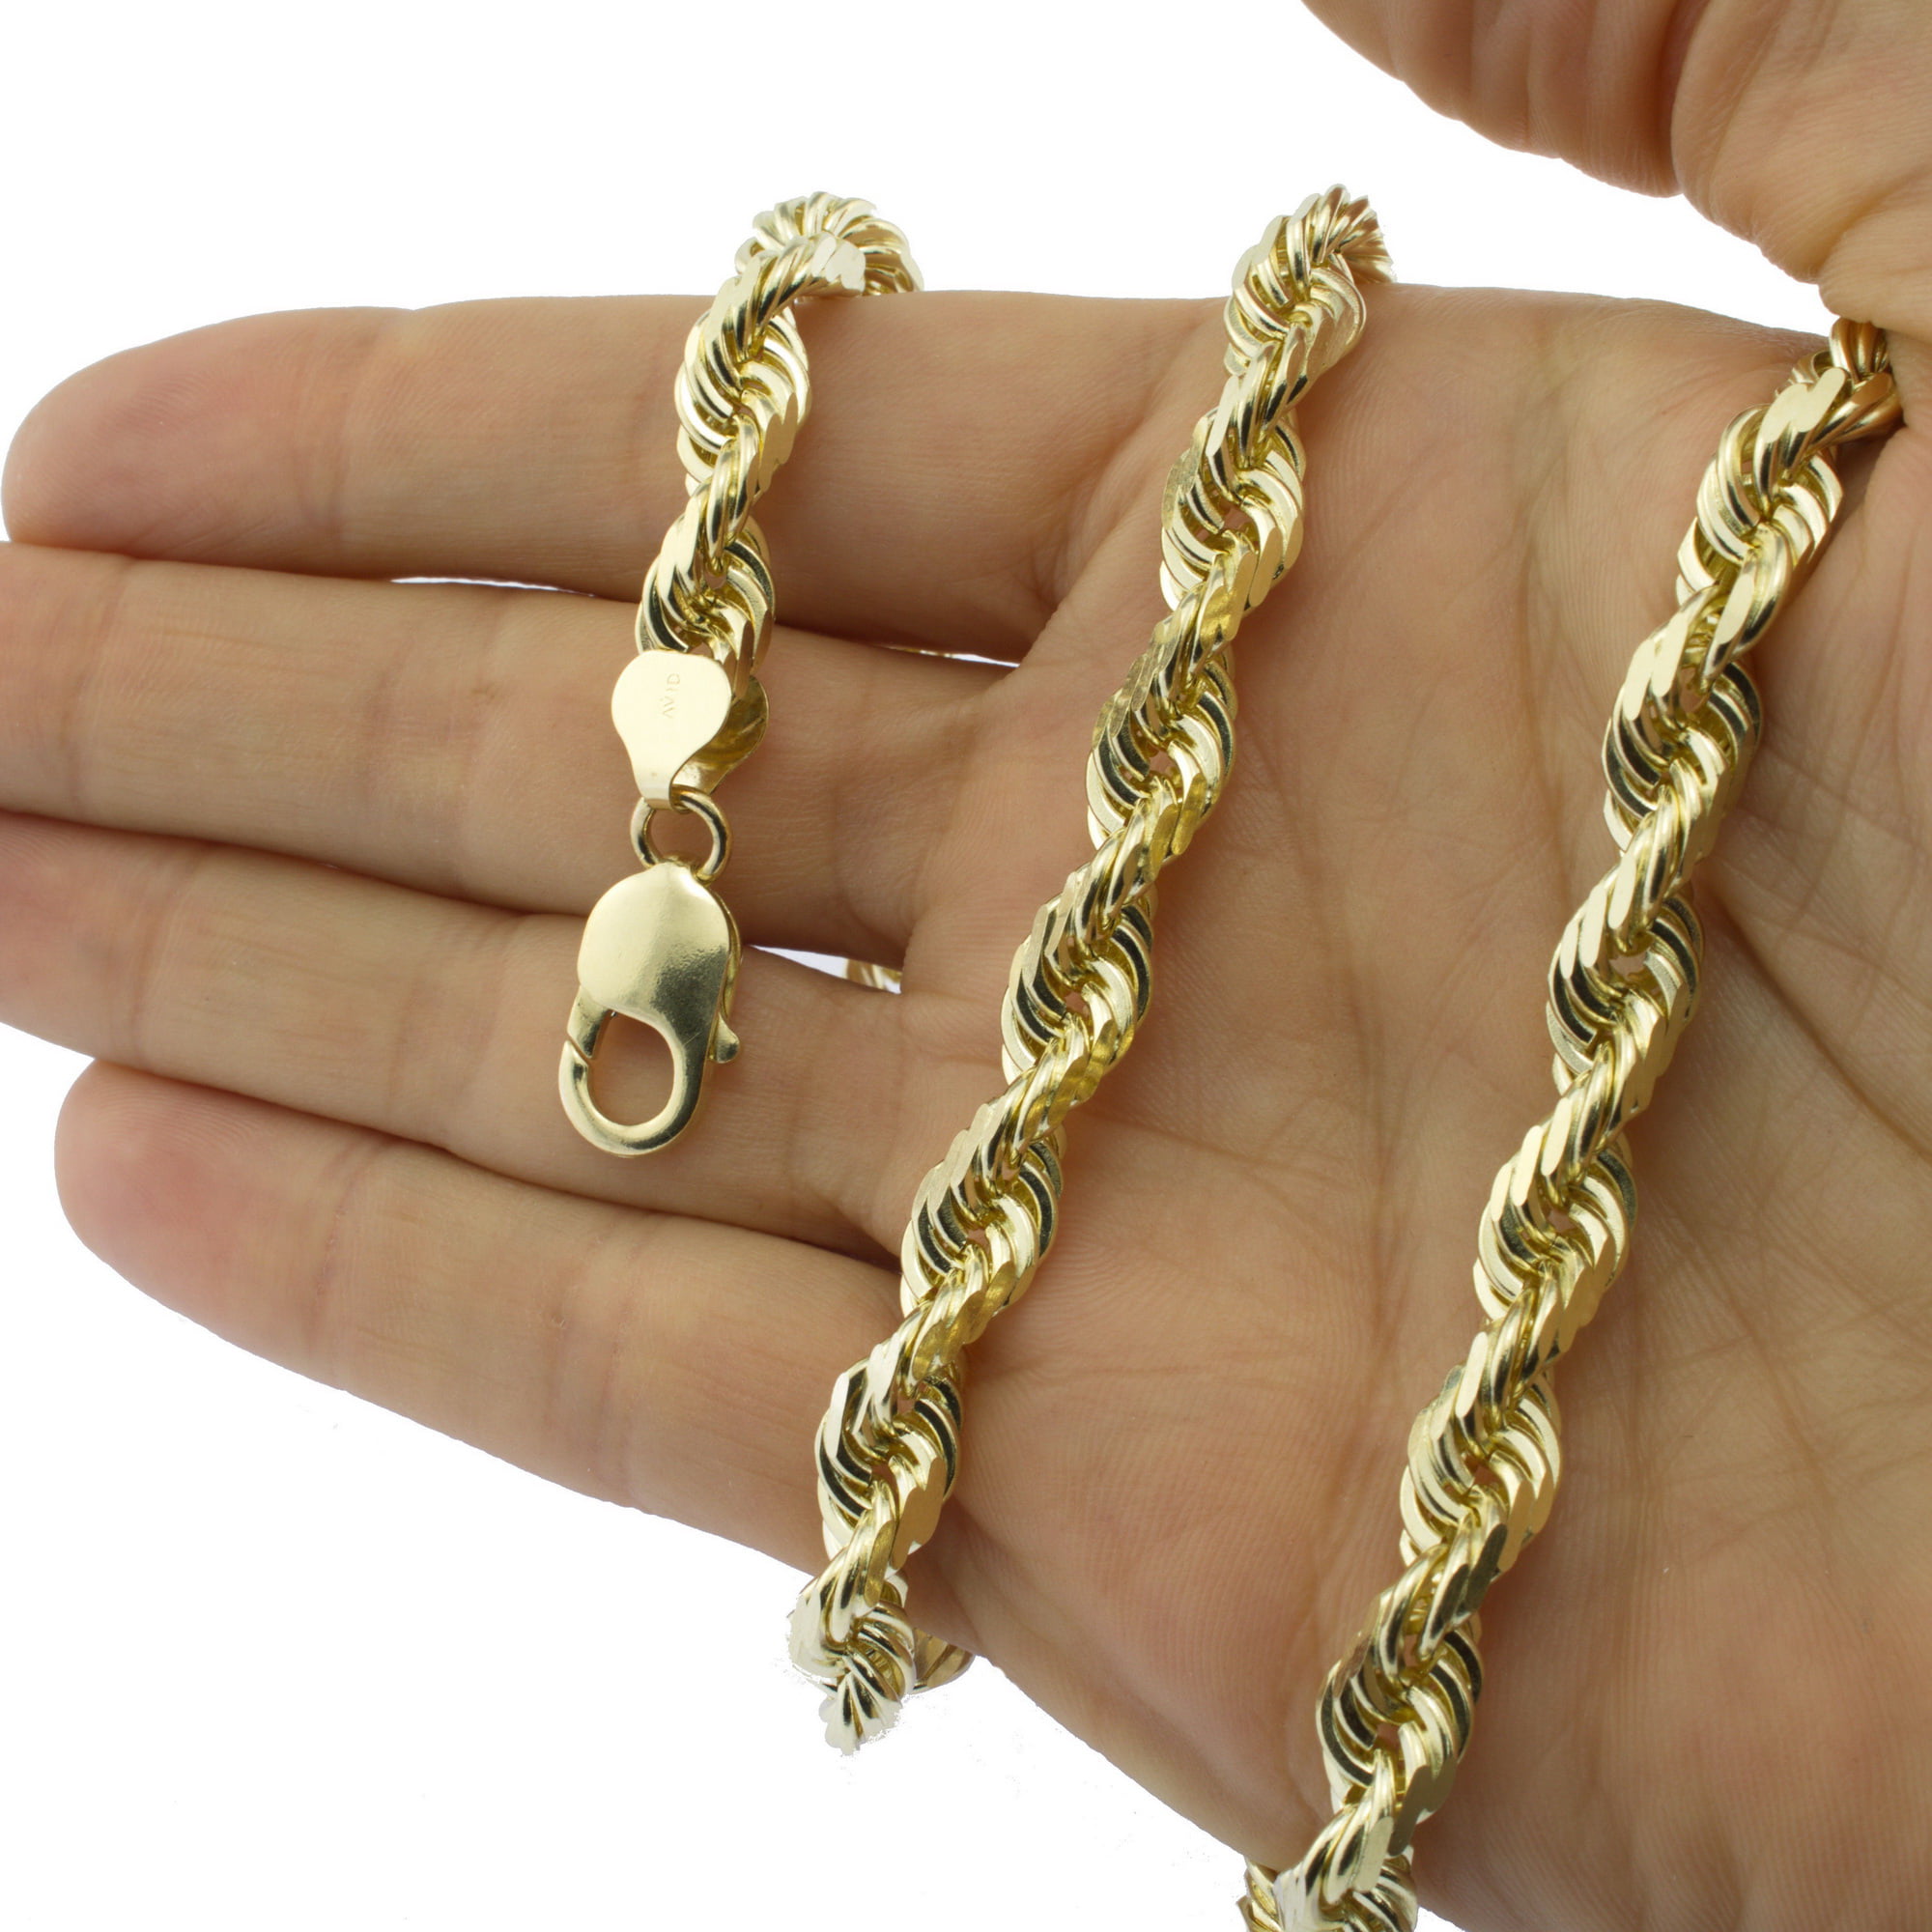 Nuragold 14k Yellow Gold 8mm Solid Rope Chain Diamond Cut Link Necklace,  Mens Jewelry 20 - 30 